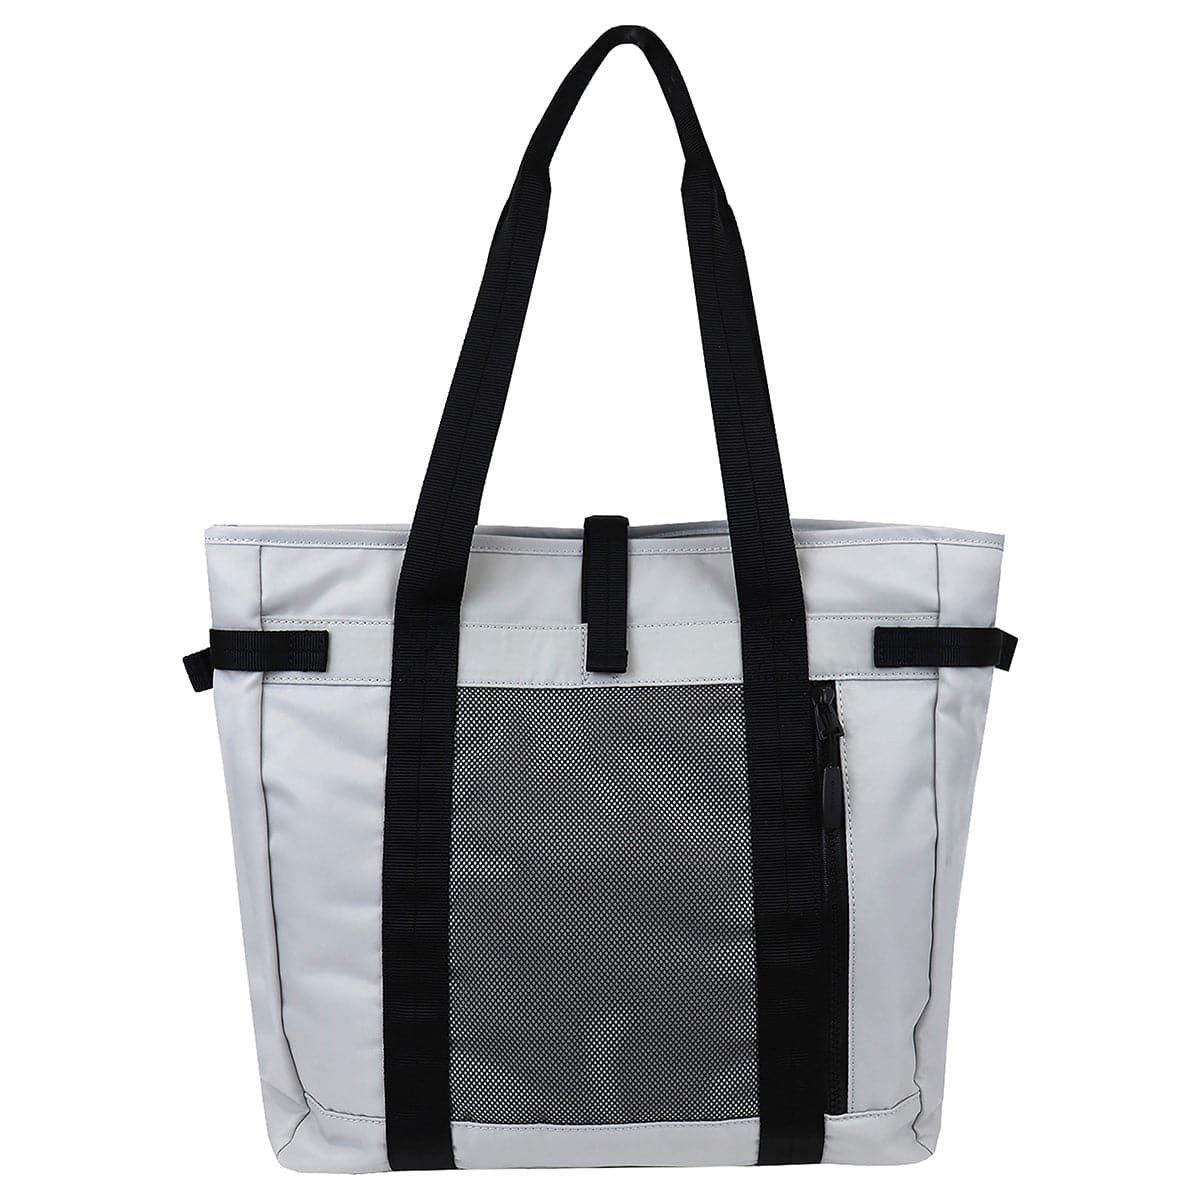 Hedgren Summit Sustainably Made Tote Bag